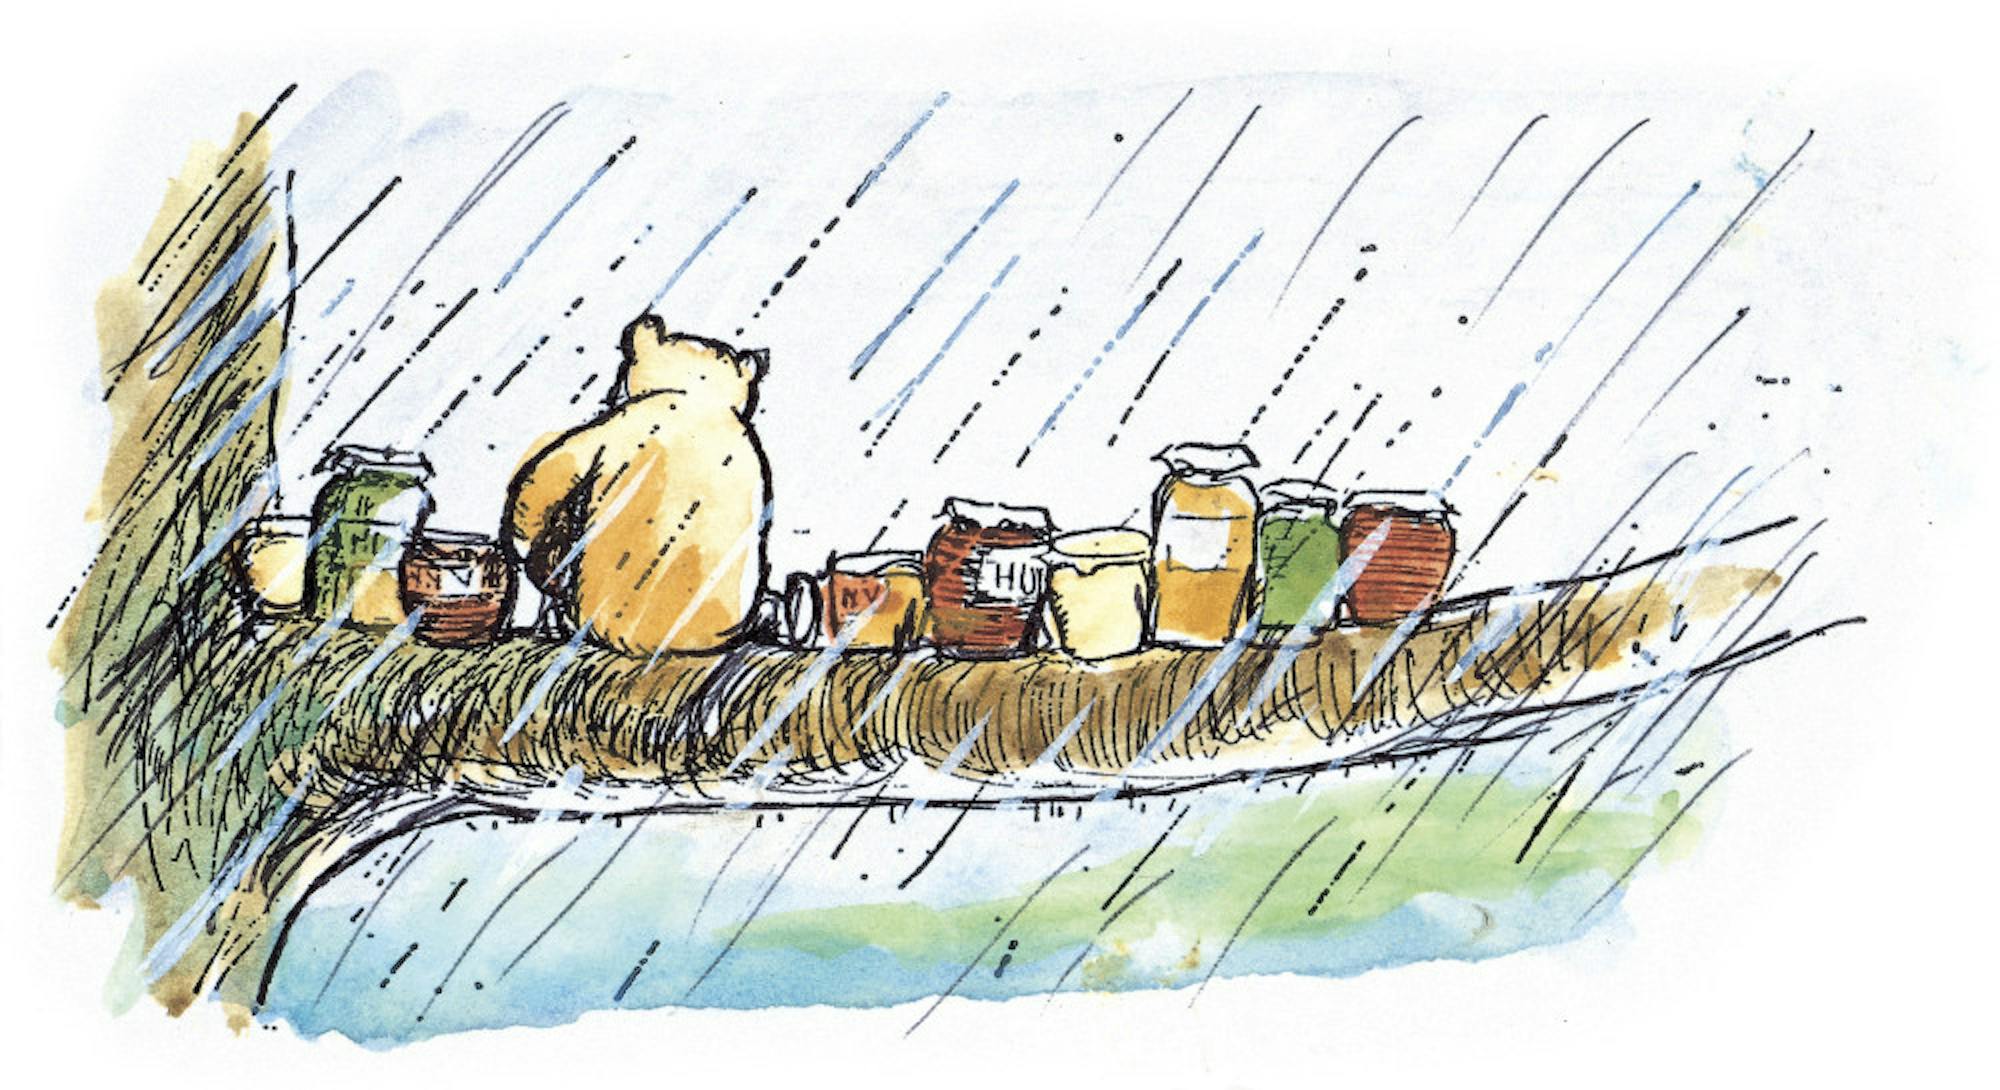 03_Print_of_Pooh_sitting_on_a_branch_with_honeypots-1